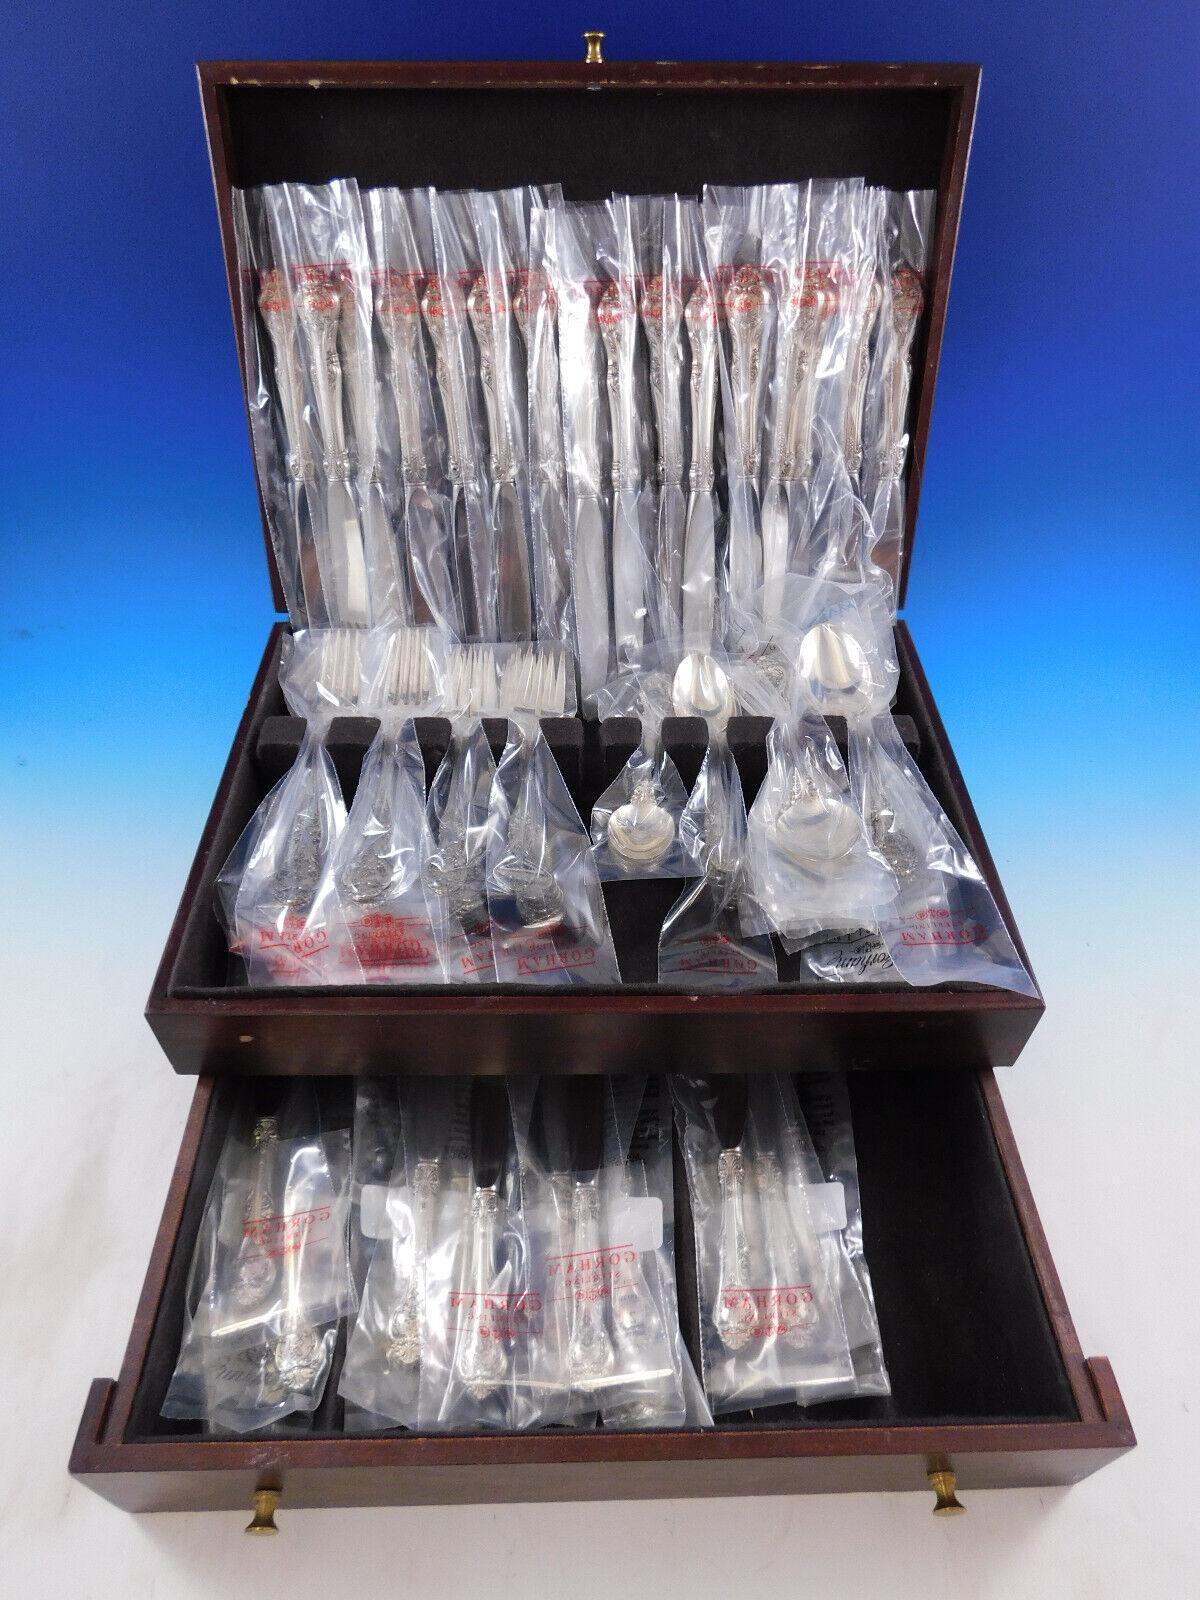 Monumental unused Place Size King Edward by Gorham sterling silver Flatware set, 96 pieces. This set includes:
The King Edward pattern lends a regal flair to your table décor. The intricately sculpted handle reflects superior Gorham design and